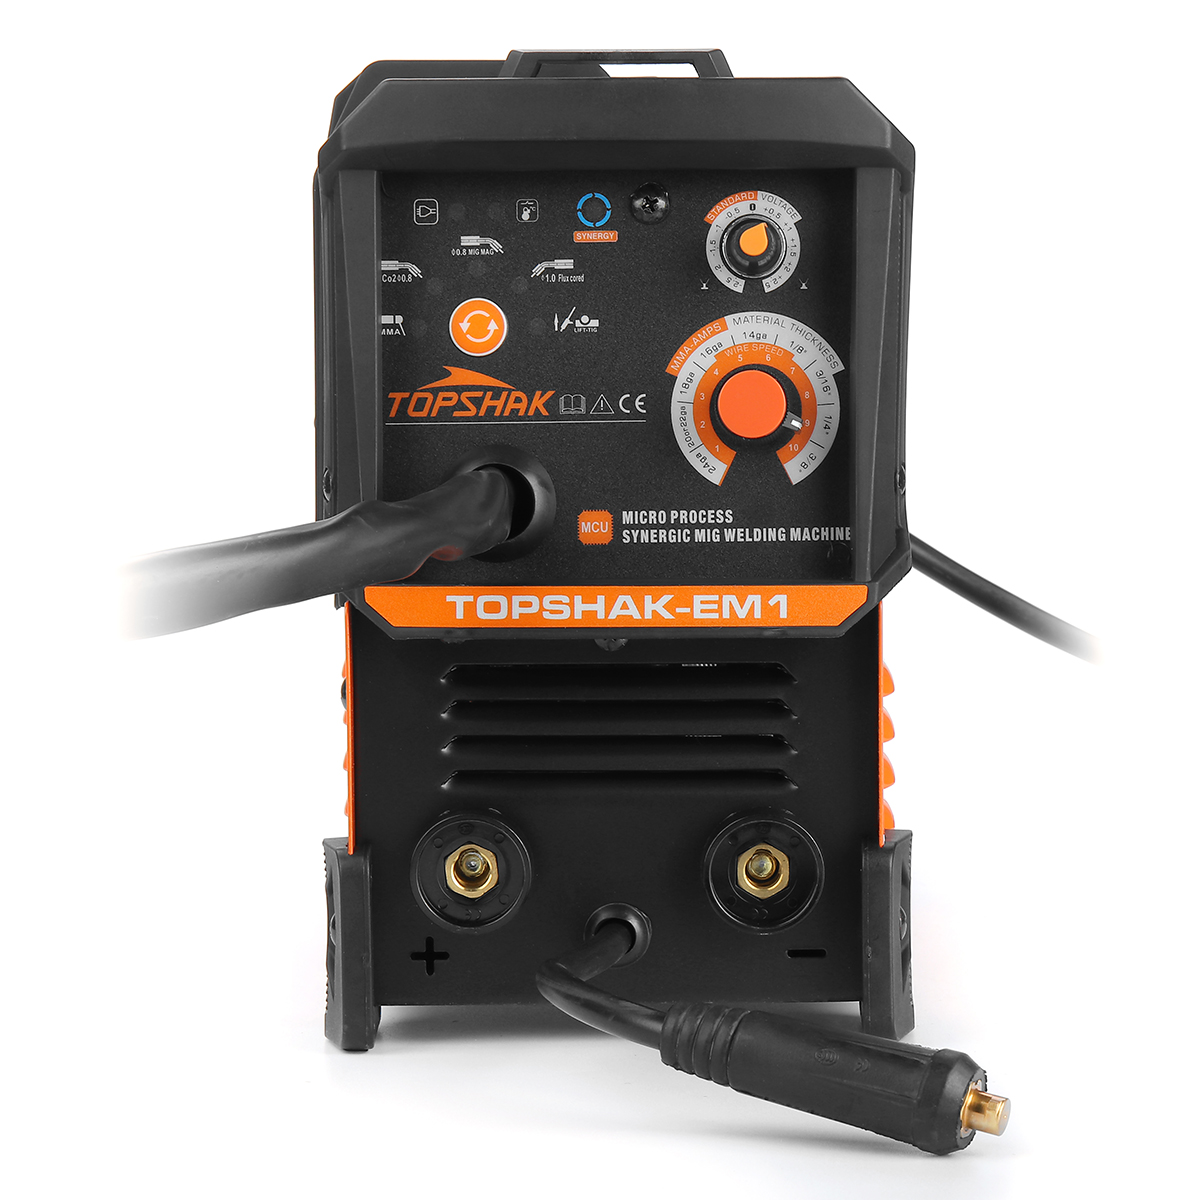 Find Topshak TS EM1 220V 3 in 1 160A Multifunctional Welding Machine with MlG/MAG/FCW/MMA/TIG Welding Tools for Sale on Gipsybee.com with cryptocurrencies